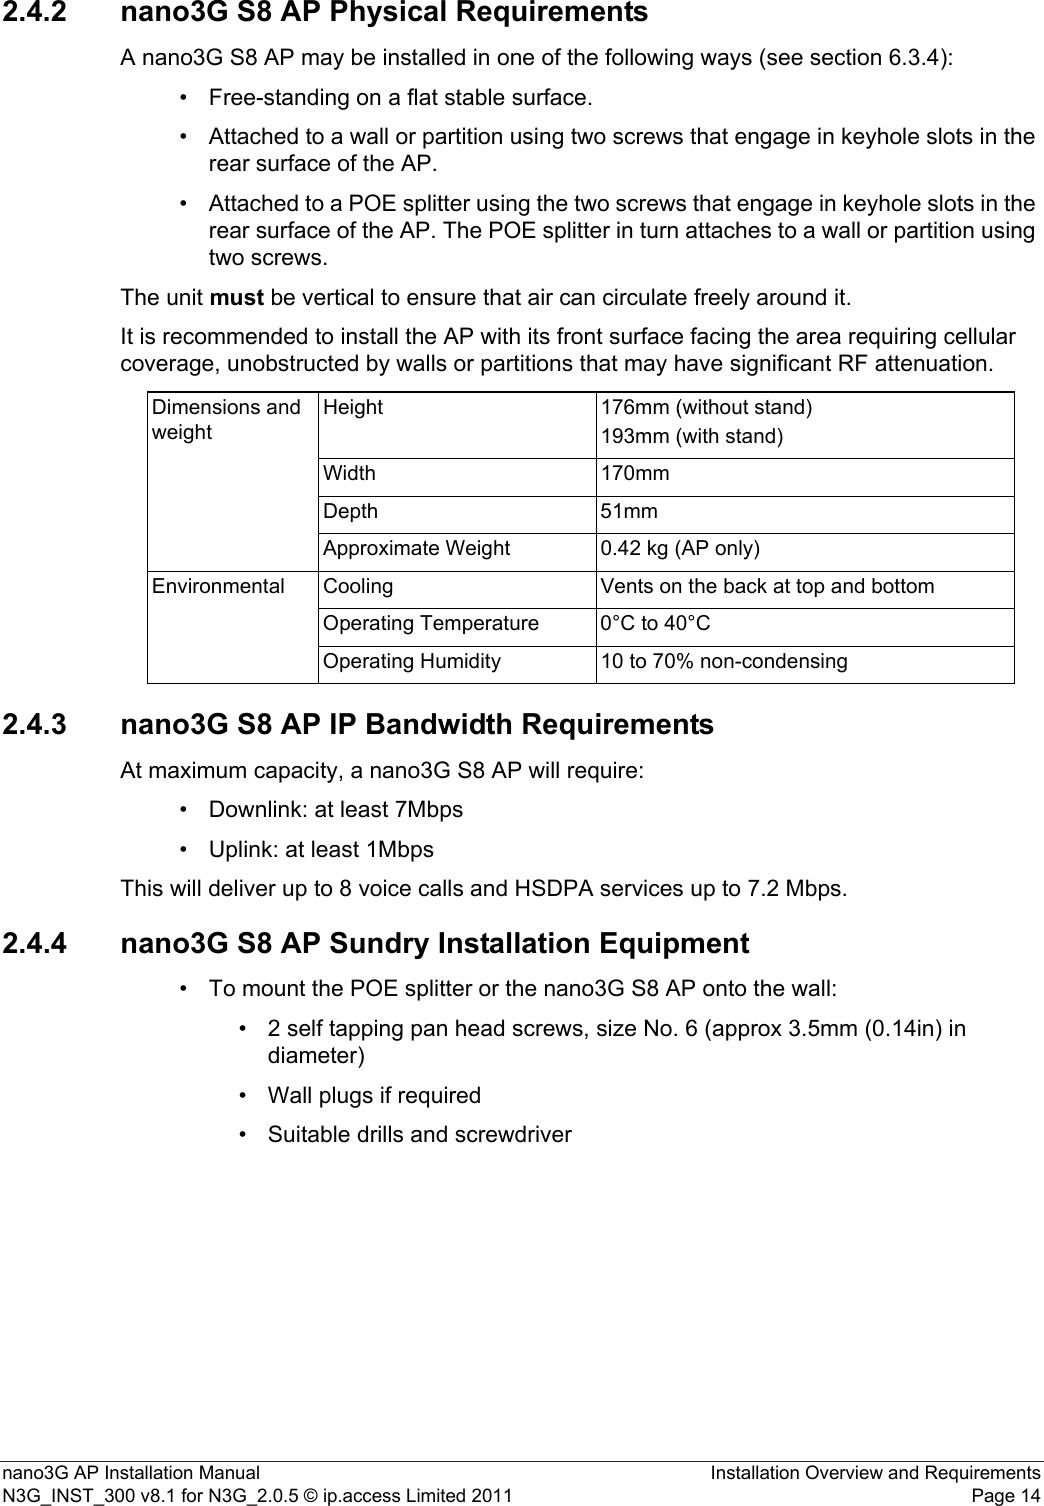 nano3G AP Installation Manual Installation Overview and RequirementsN3G_INST_300 v8.1 for N3G_2.0.5 © ip.access Limited 2011 Page 142.4.2 nano3G S8 AP Physical RequirementsA nano3G S8 AP may be installed in one of the following ways (see section 6.3.4):• Free-standing on a flat stable surface.• Attached to a wall or partition using two screws that engage in keyhole slots in the rear surface of the AP.• Attached to a POE splitter using the two screws that engage in keyhole slots in the rear surface of the AP. The POE splitter in turn attaches to a wall or partition using two screws.The unit must be vertical to ensure that air can circulate freely around it.It is recommended to install the AP with its front surface facing the area requiring cellular coverage, unobstructed by walls or partitions that may have significant RF attenuation.2.4.3 nano3G S8 AP IP Bandwidth RequirementsAt maximum capacity, a nano3G S8 AP will require:• Downlink: at least 7Mbps• Uplink: at least 1MbpsThis will deliver up to 8 voice calls and HSDPA services up to 7.2 Mbps.2.4.4 nano3G S8 AP Sundry Installation Equipment• To mount the POE splitter or the nano3G S8 AP onto the wall:• 2 self tapping pan head screws, size No. 6 (approx 3.5mm (0.14in) in diameter)• Wall plugs if required• Suitable drills and screwdriverDimensions and weightHeight 176mm (without stand)193mm (with stand)Width 170mmDepth 51mmApproximate Weight 0.42 kg (AP only)Environmental Cooling Vents on the back at top and bottomOperating Temperature 0°C to 40°COperating Humidity 10 to 70% non-condensing